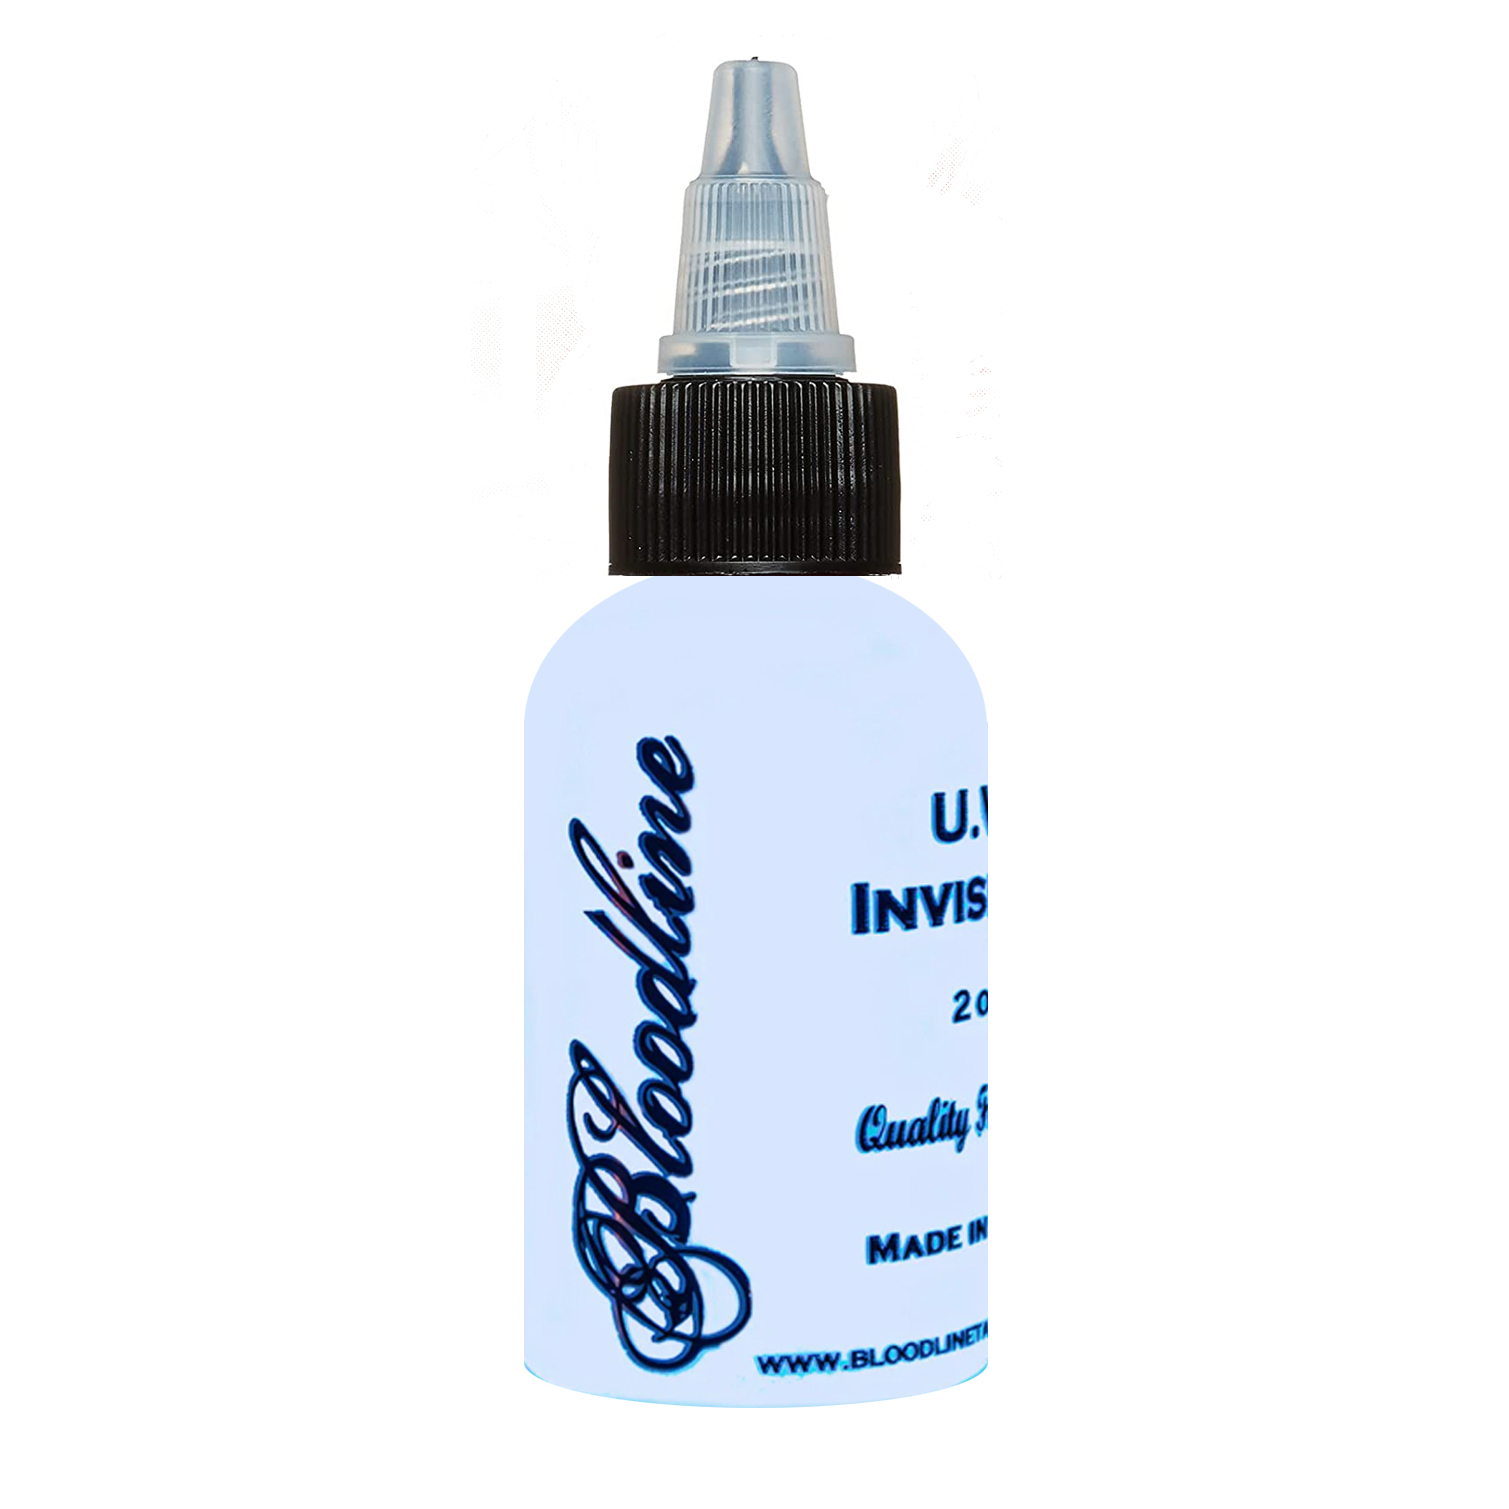 Bloodline Invisible UV Tattoo Ink | USA ONLY - Hildbrandt Tattoo Supply